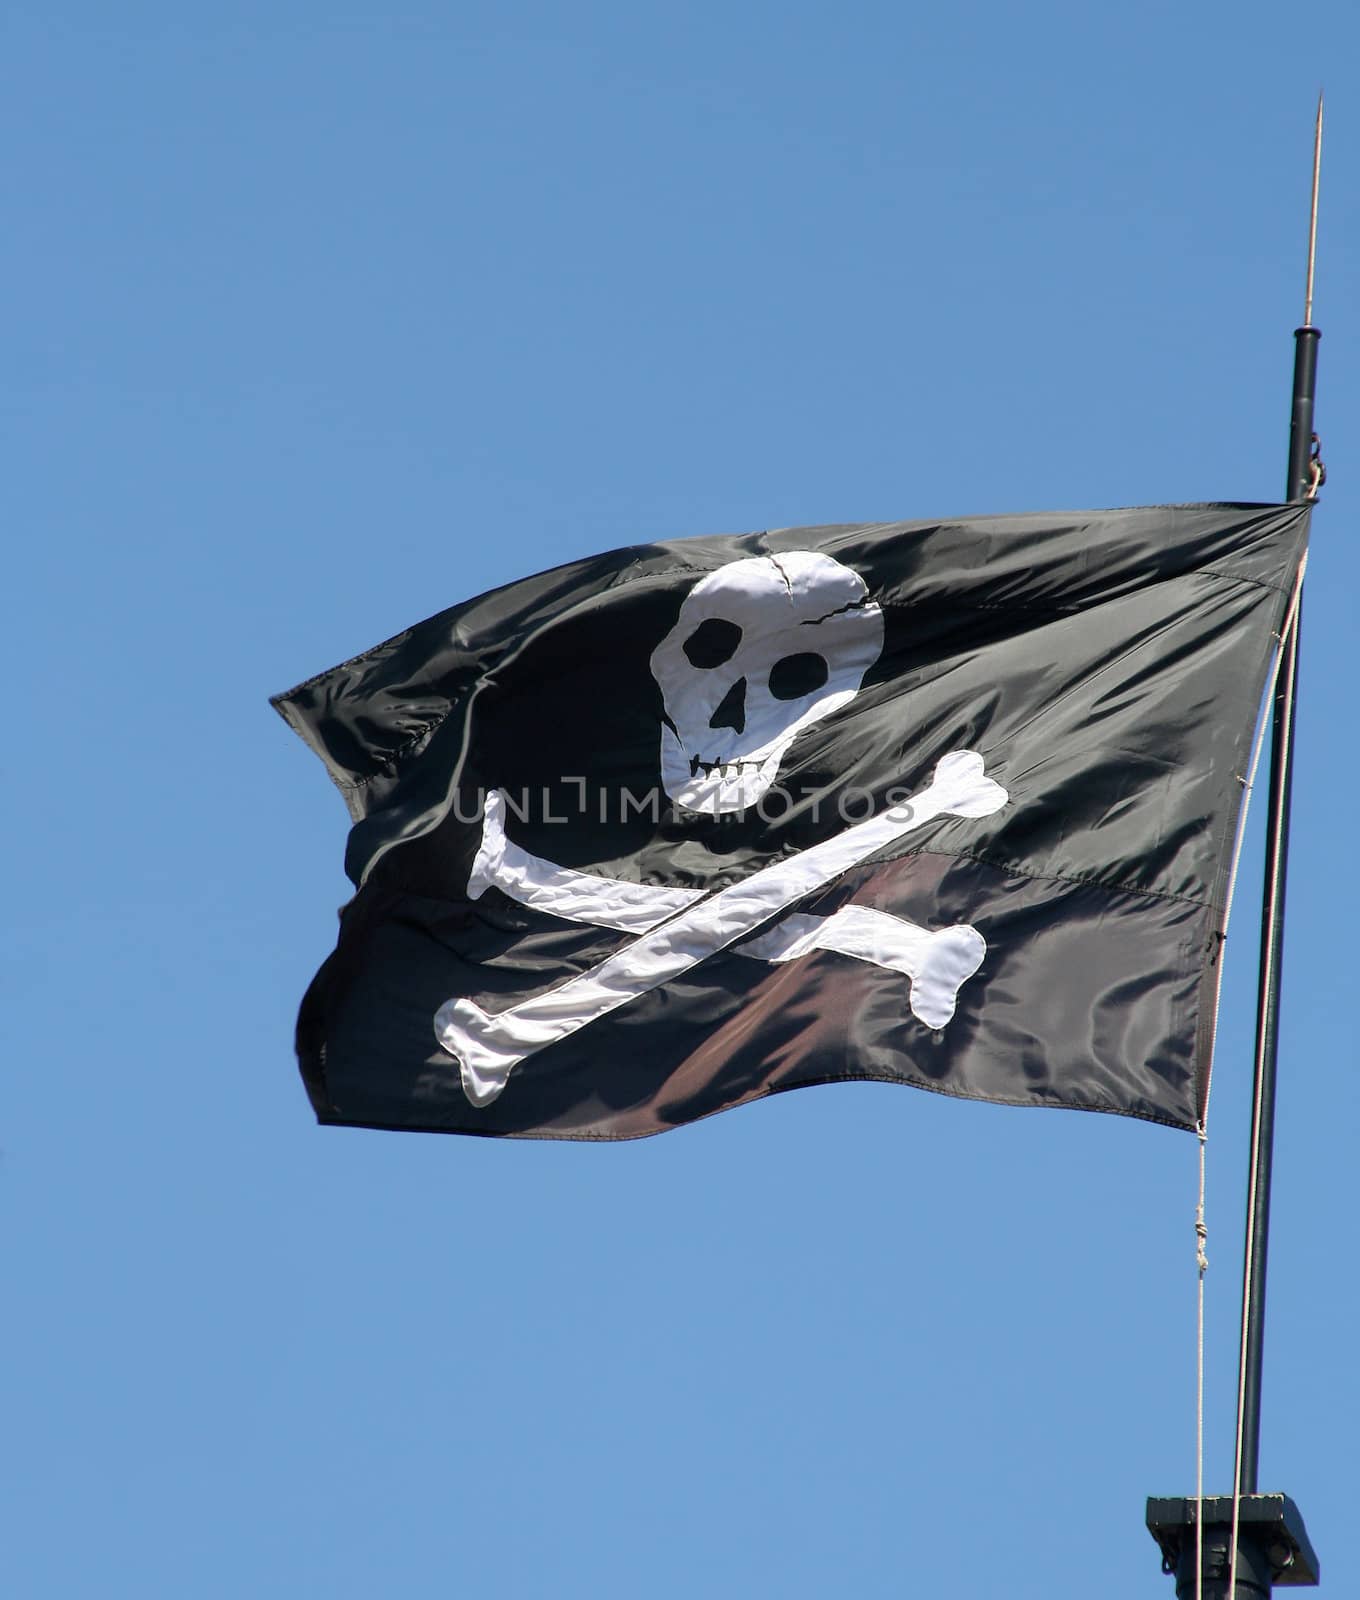 Pirate flag with skull and bones